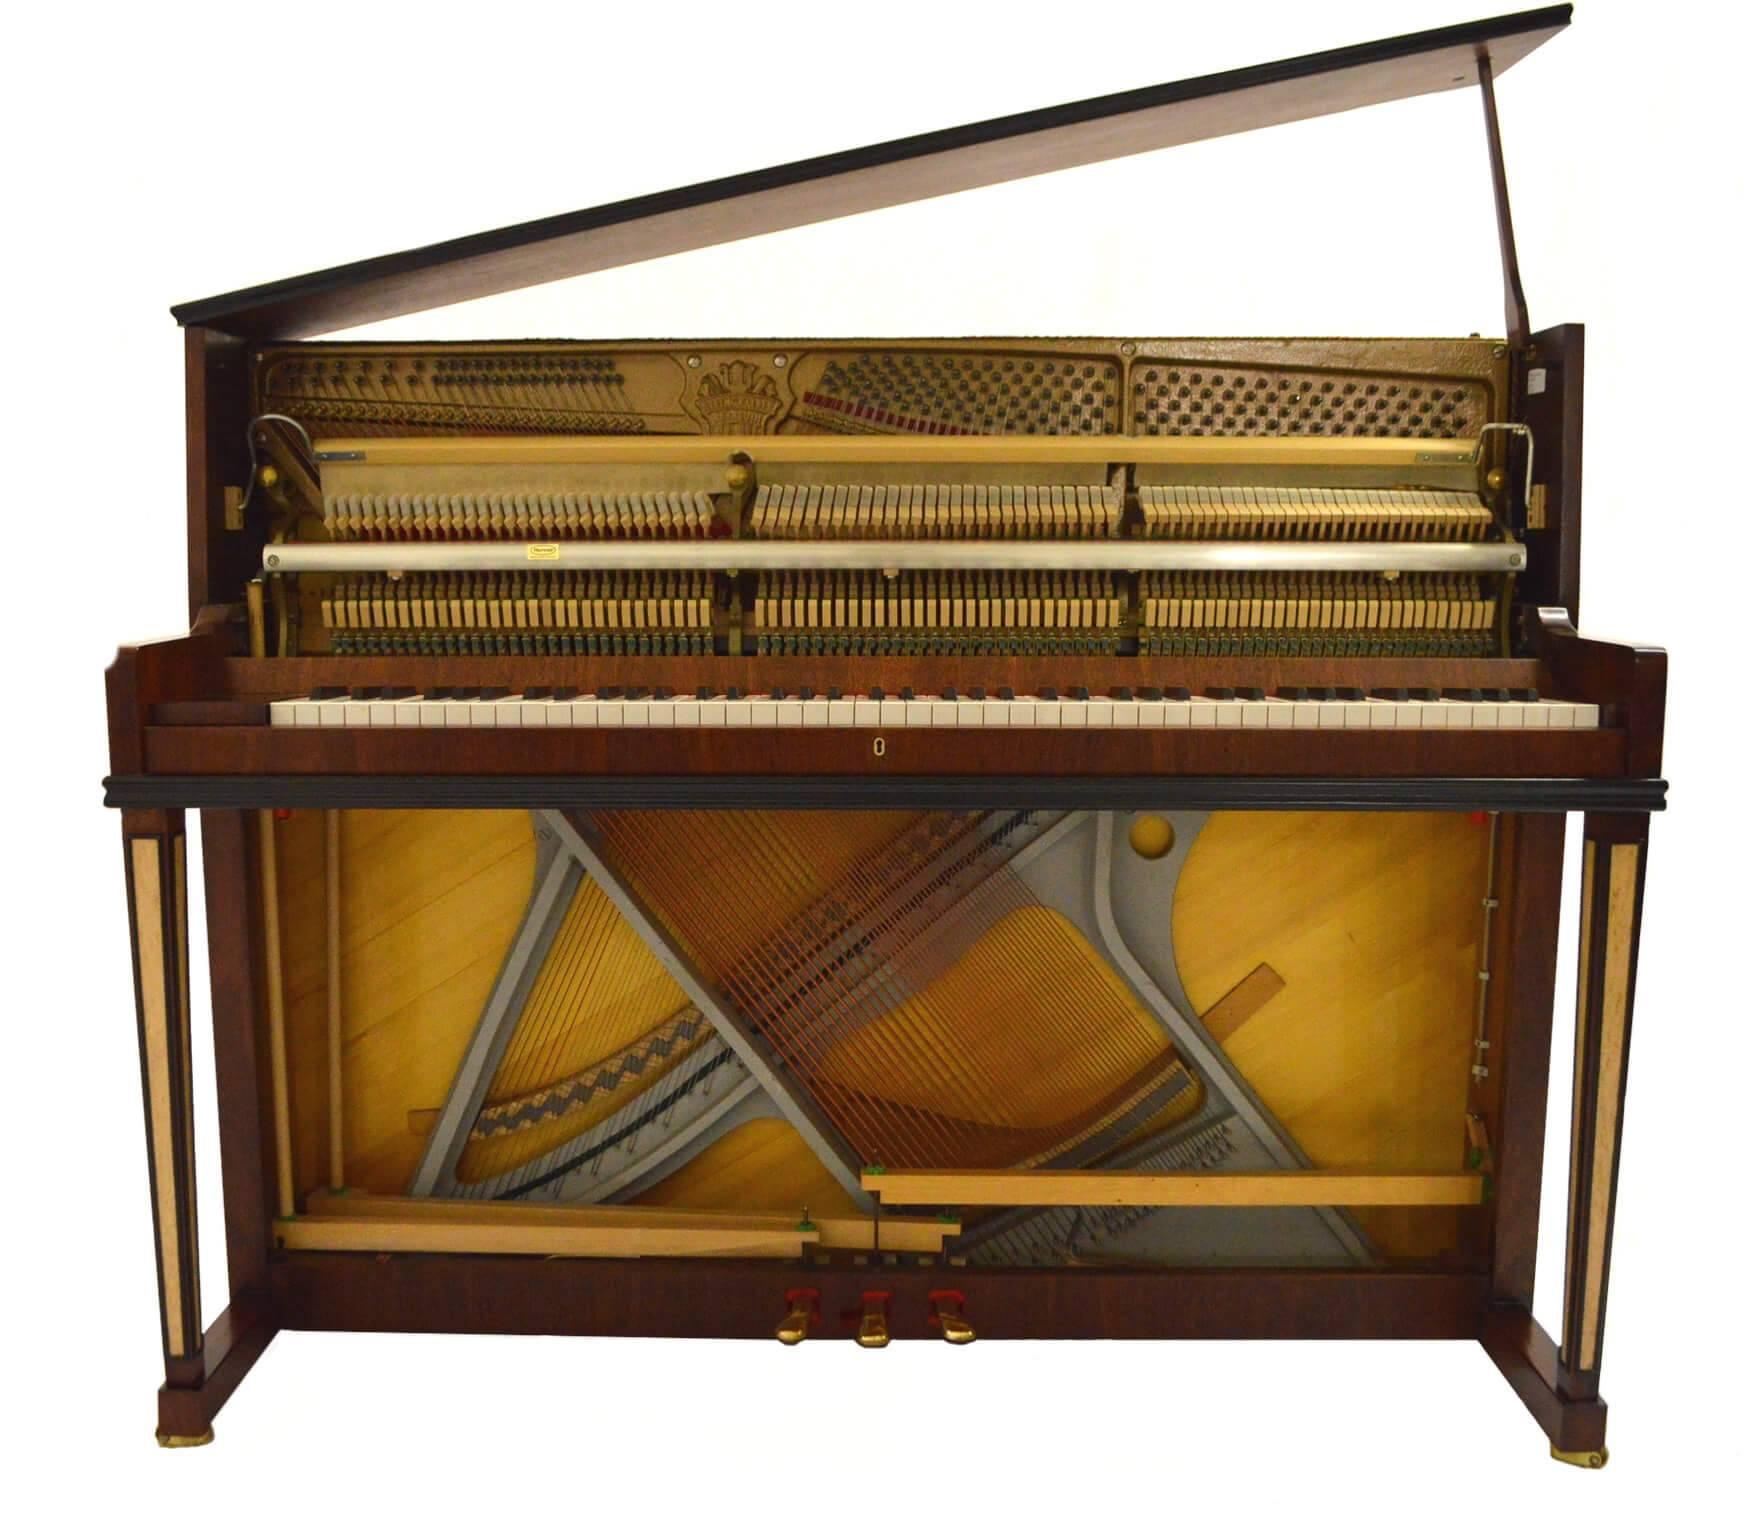 Art Deco Steingraeber & Sohne 118 Upright Piano in Mahogany with Bird's-Eye Maple Inlay For Sale